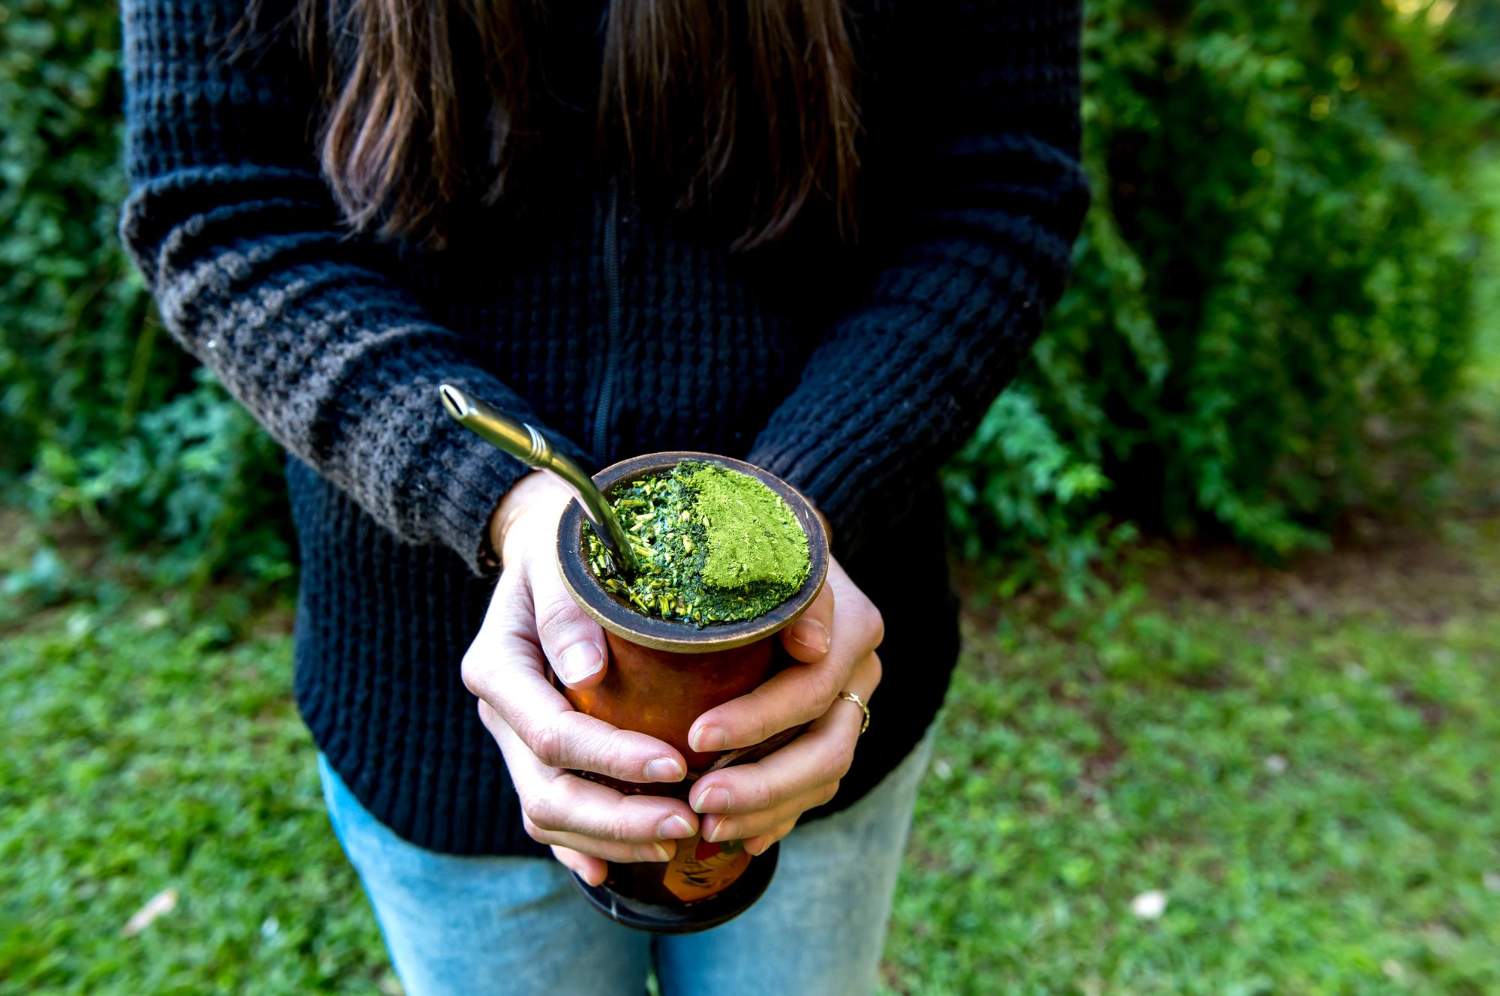 https://www.thepotiontree.co.nz/wp-content/uploads/2023/05/woman-holding-traditional-south-american-yerba-mate-tea-chimarrao-brazil.jpg